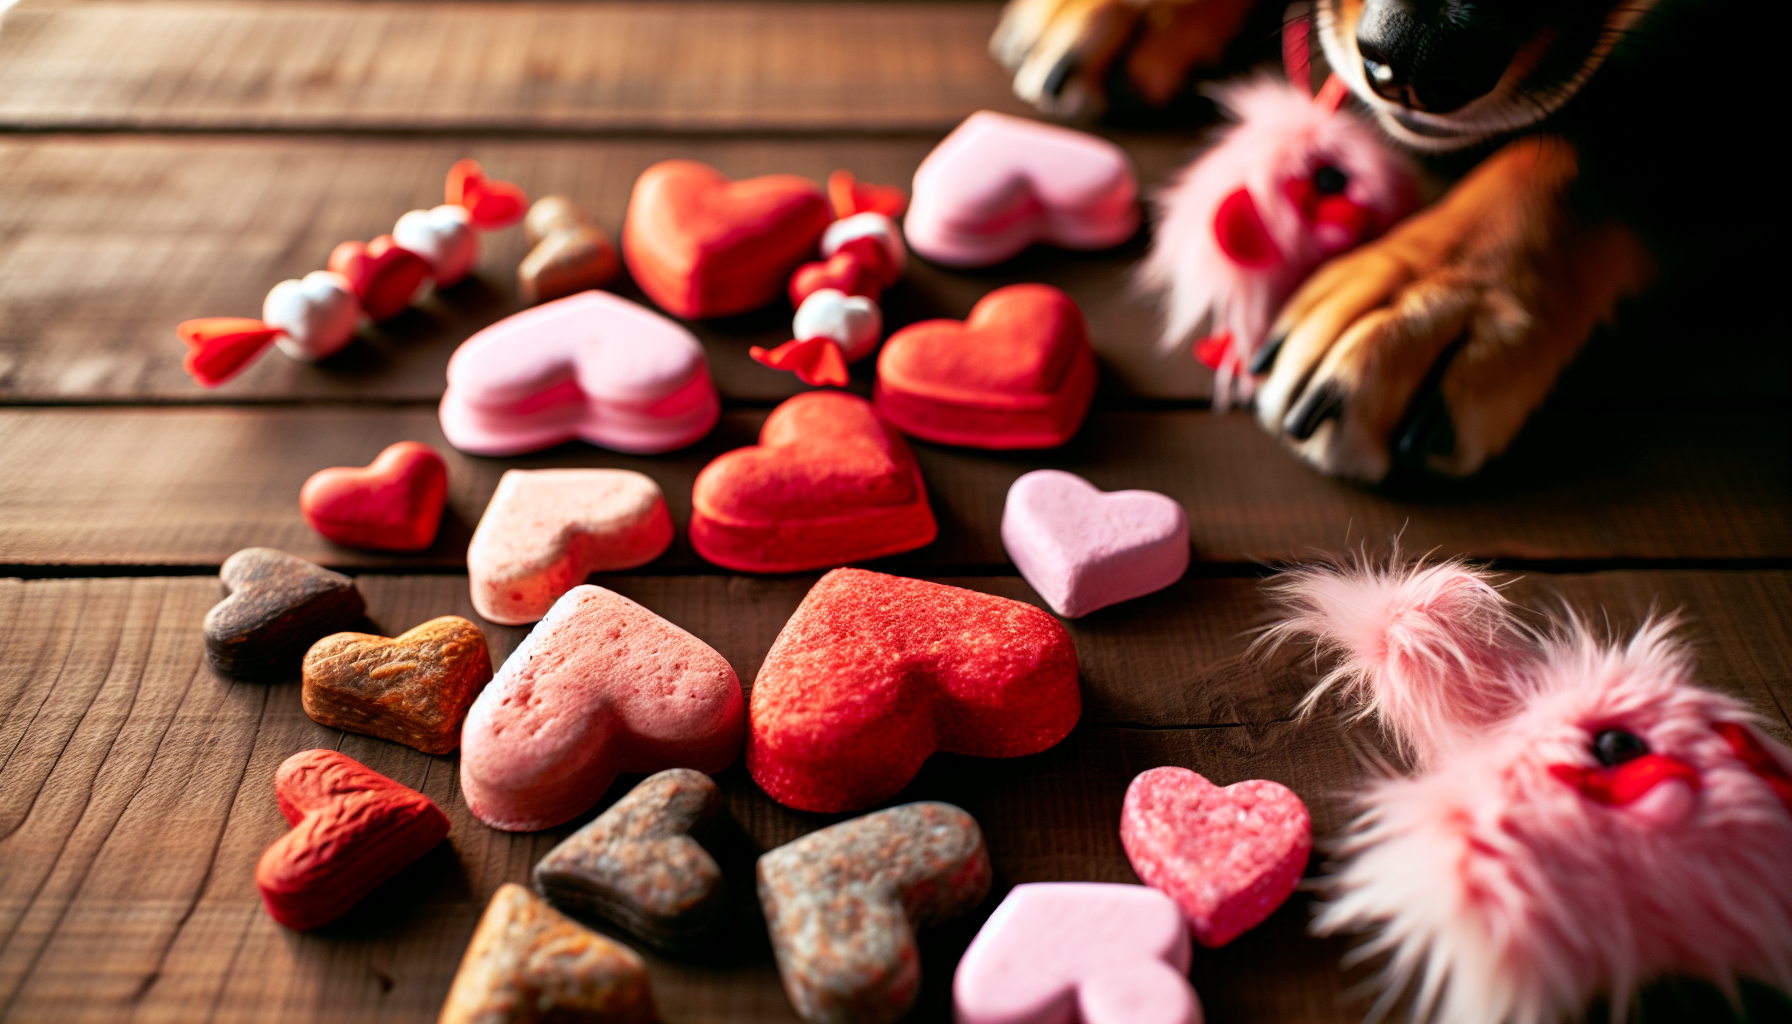 Spoiling your furry friend with heart-shaped treats and toys